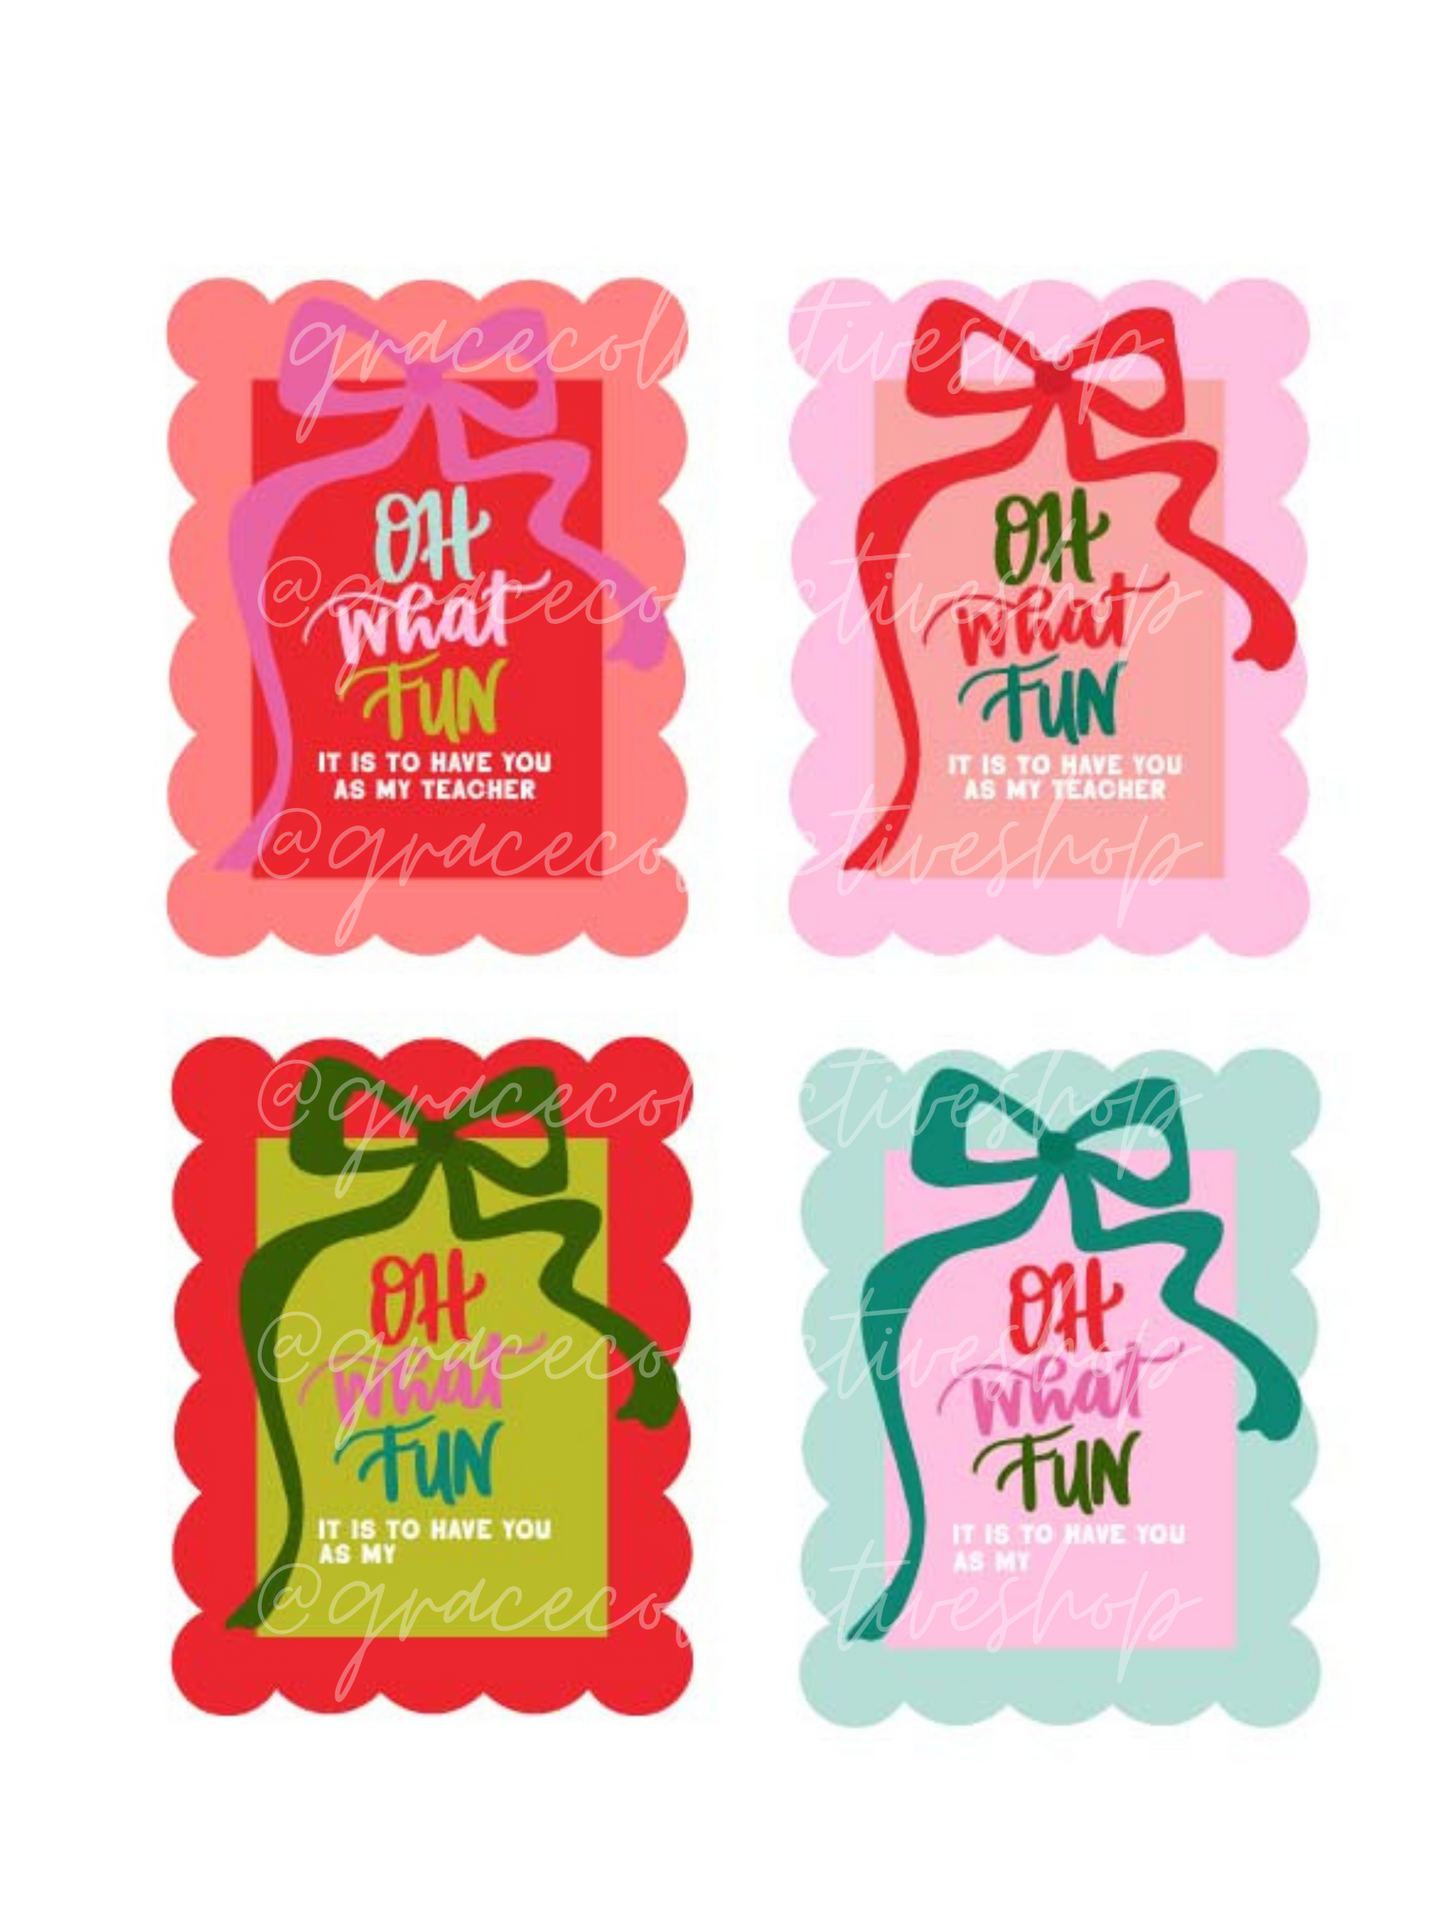 Merry + Bright | Printable Party Set